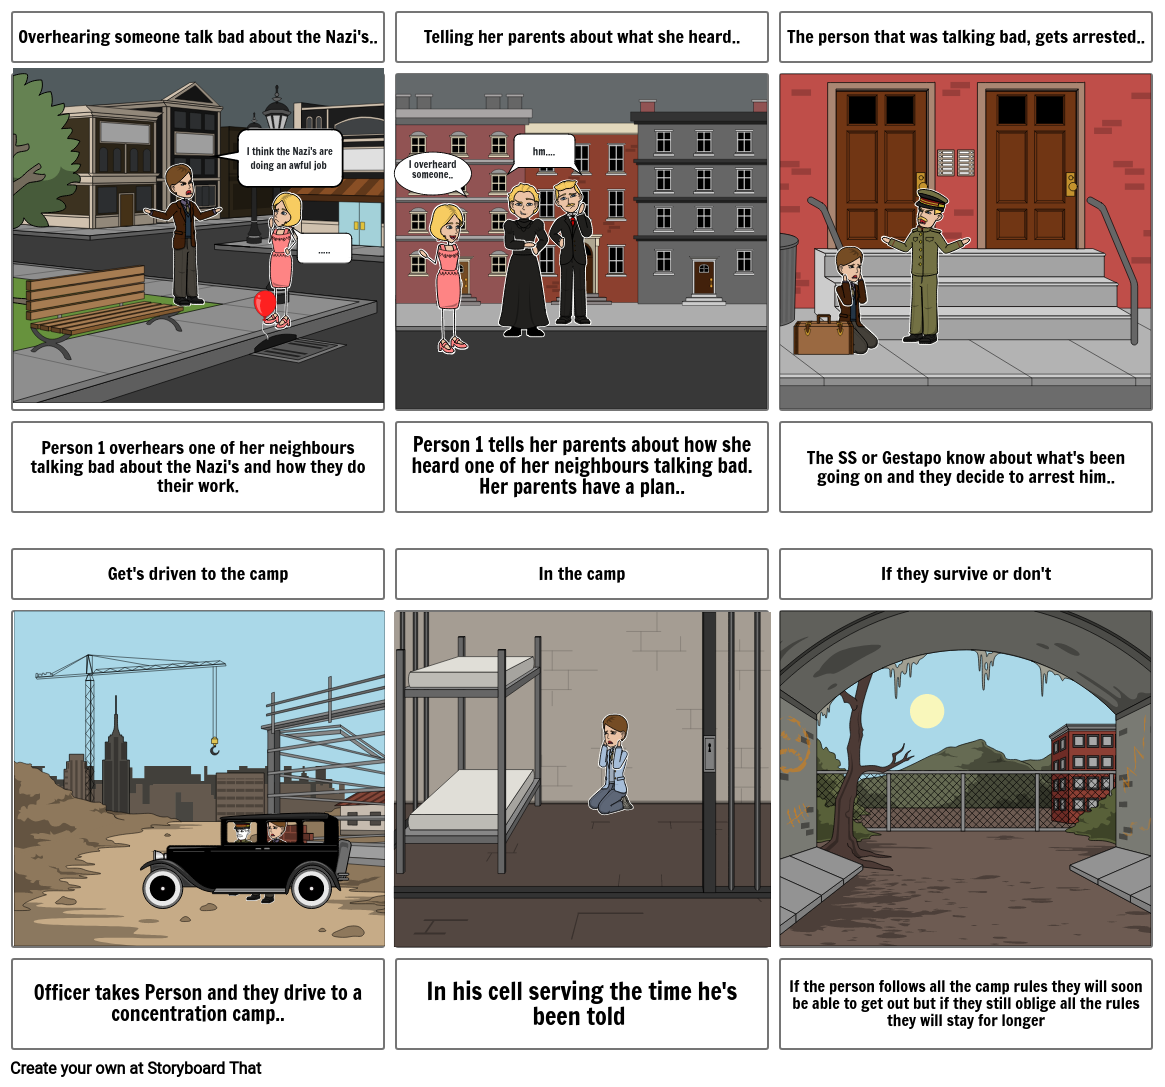 ss-story-line-storyboard-by-c23defdc